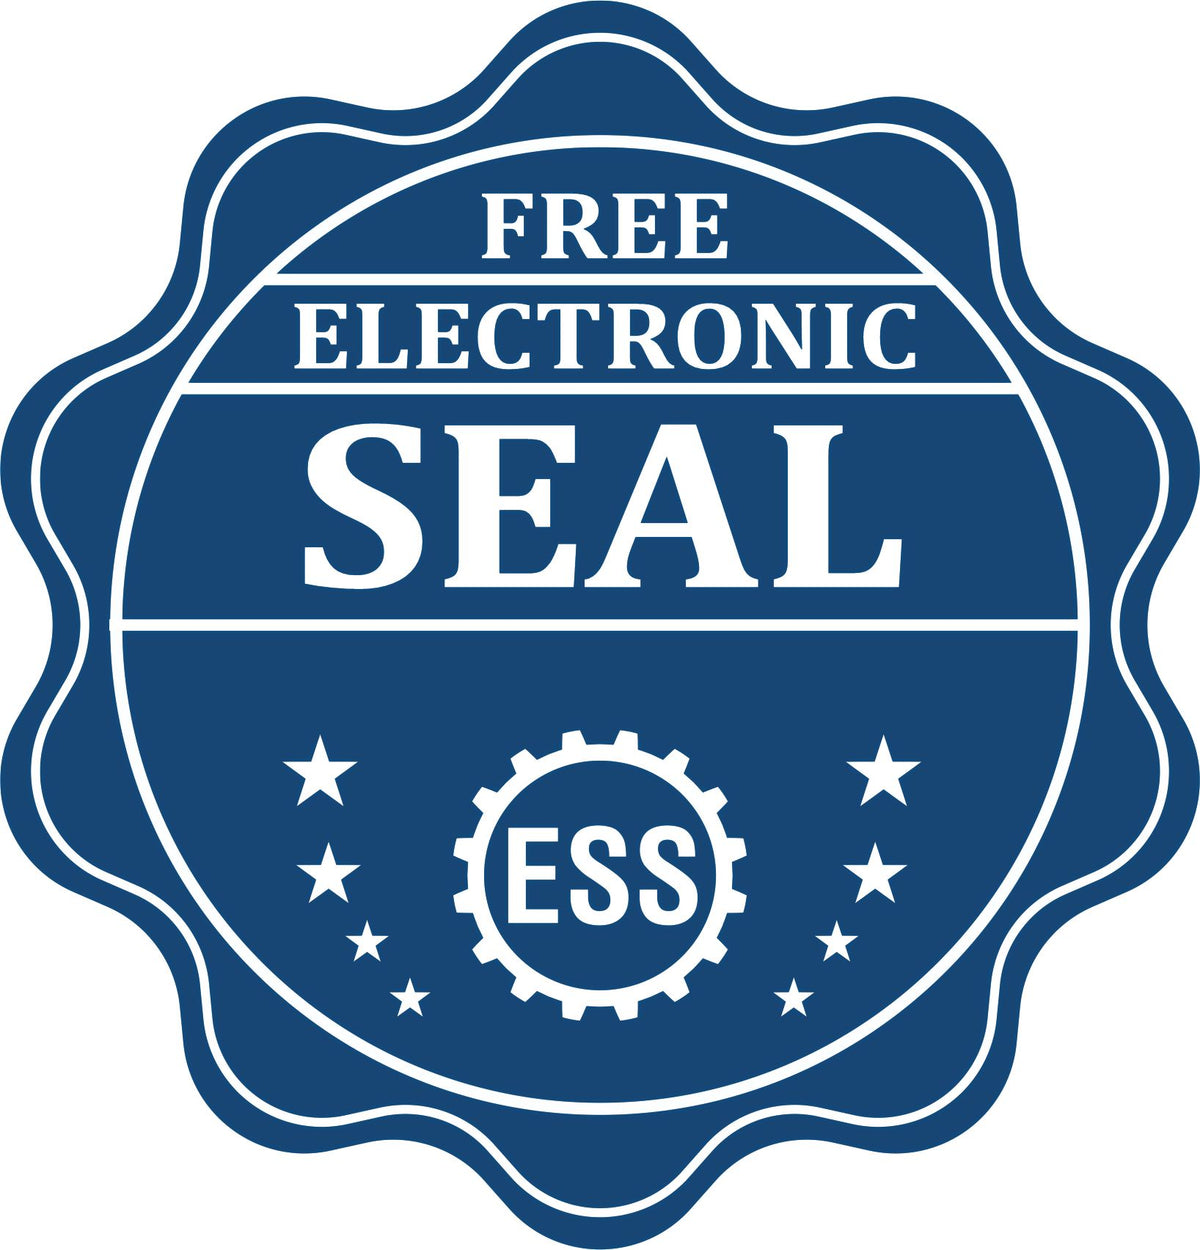 A badge showing a free electronic seal for the Slim Pre-Inked Nevada Landscape Architect Seal Stamp with stars and the ESS gear on the emblem.